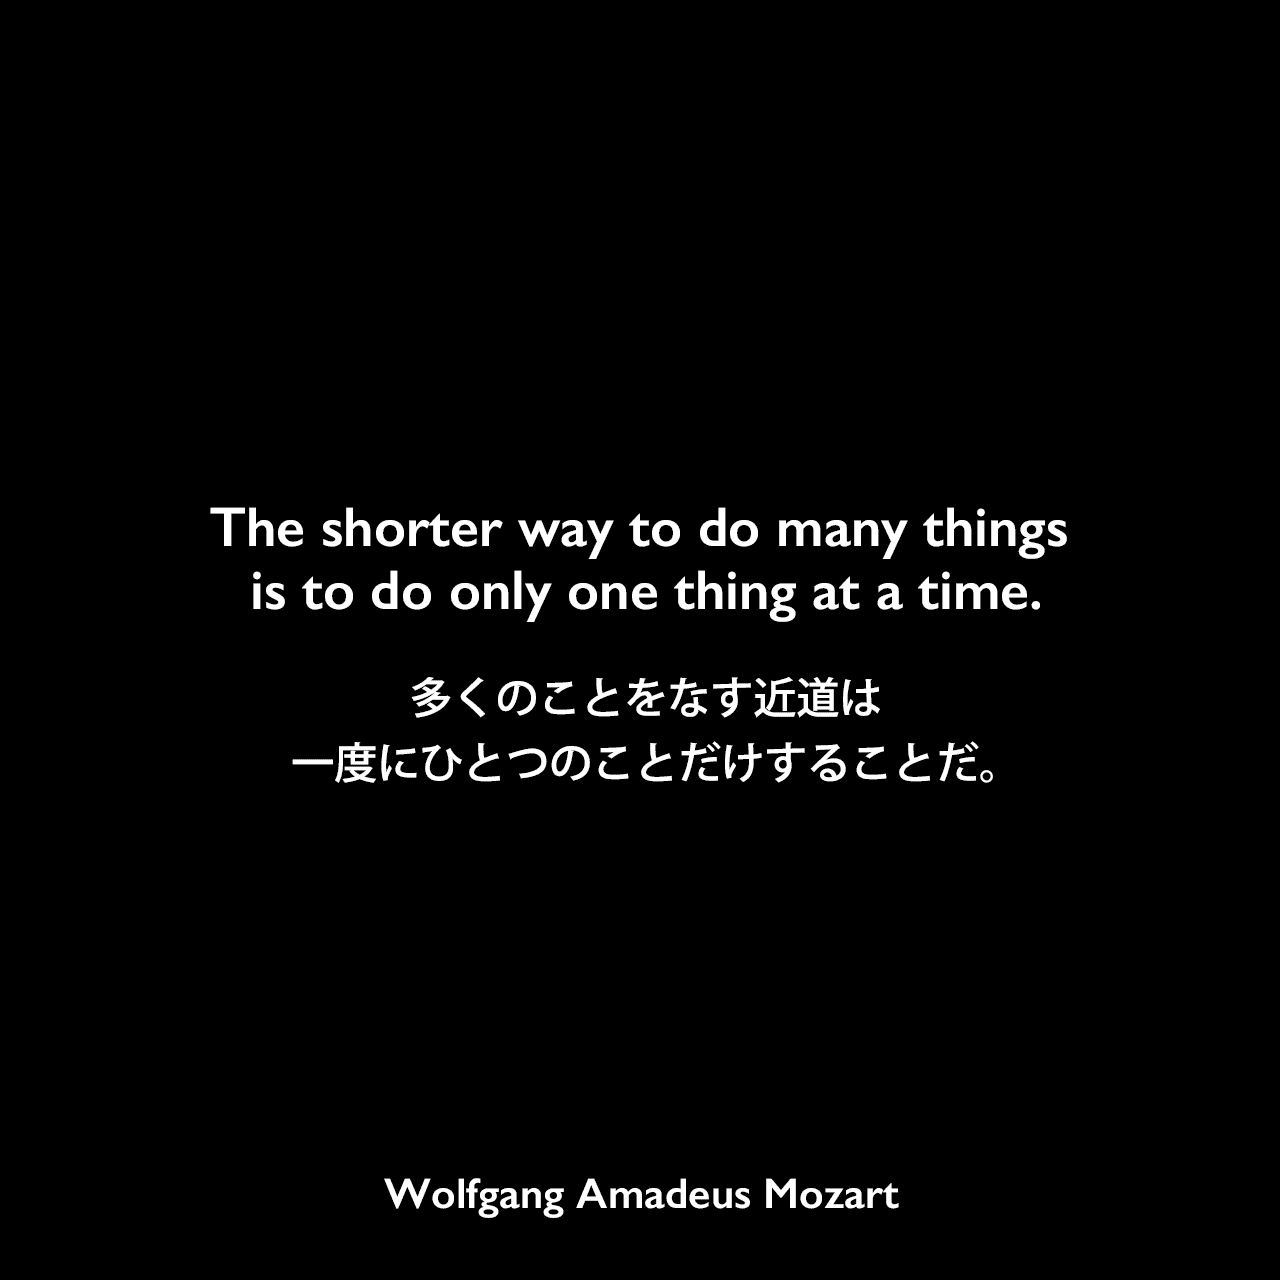 The shorter way to do many things is to do only one thing at a time.多くのことをなす近道は、一度にひとつのことだけすることだ。